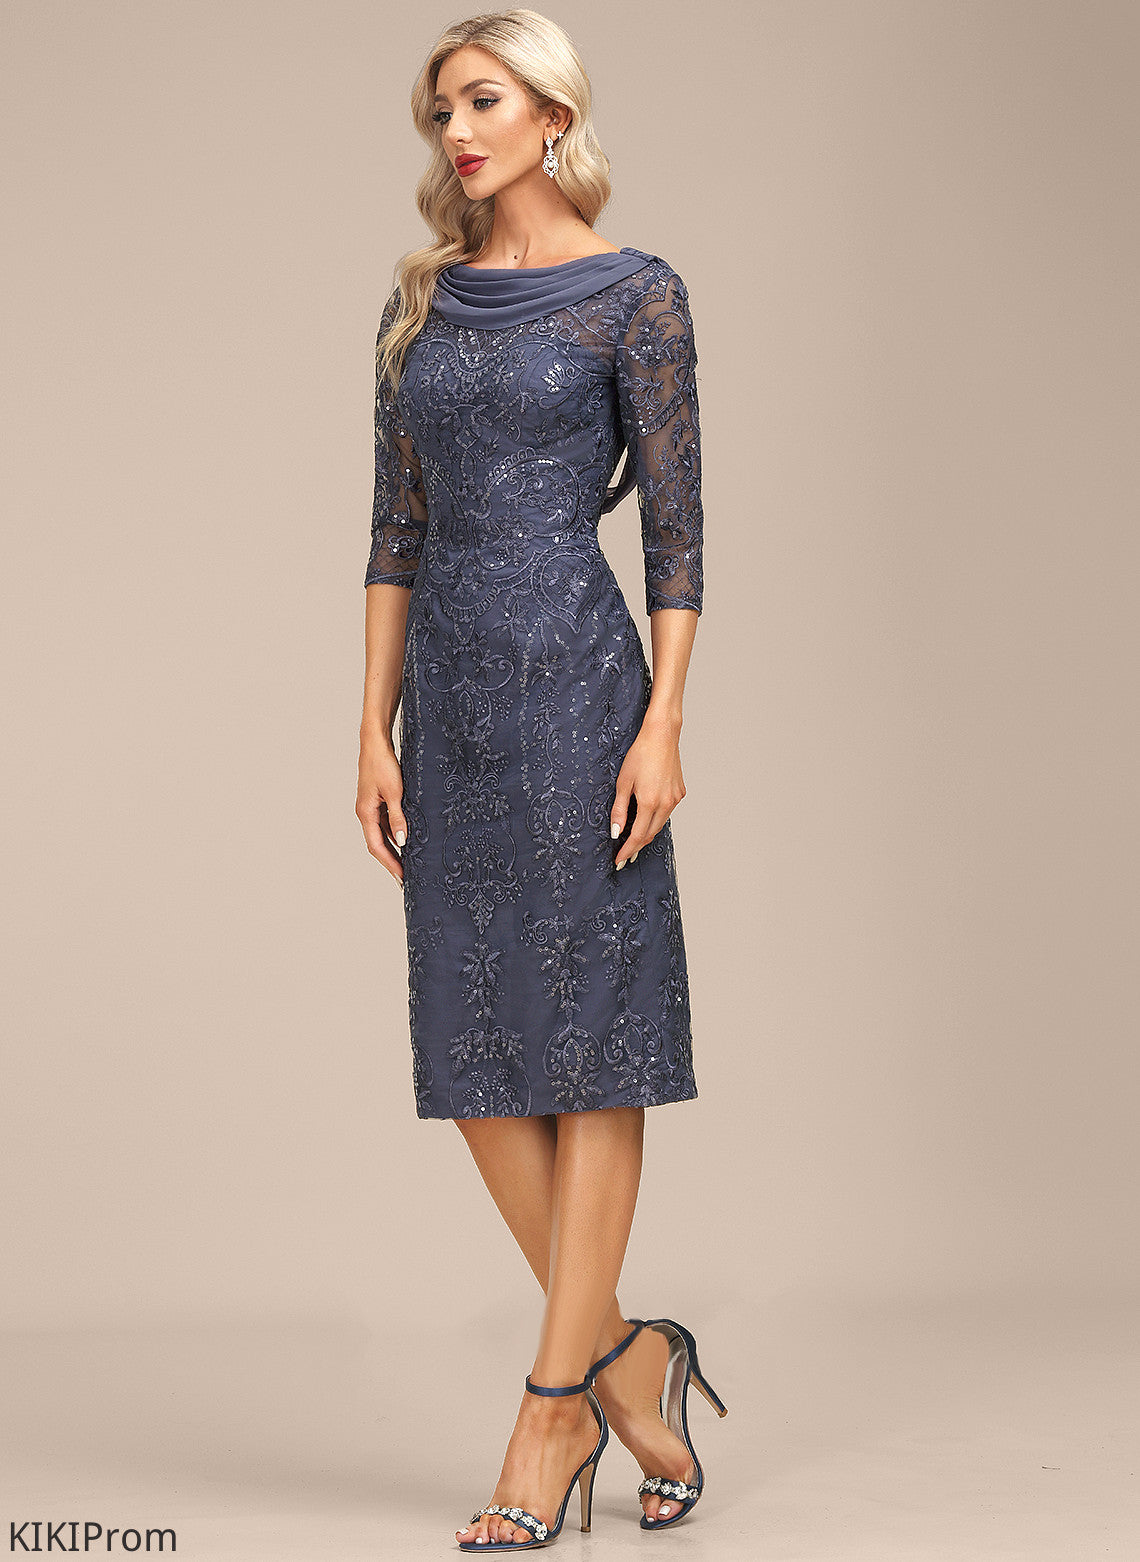 Sheath/Column With Lace Sequins Knee-Length Dress Trudie Cocktail Cocktail Dresses Scoop Neck Chiffon